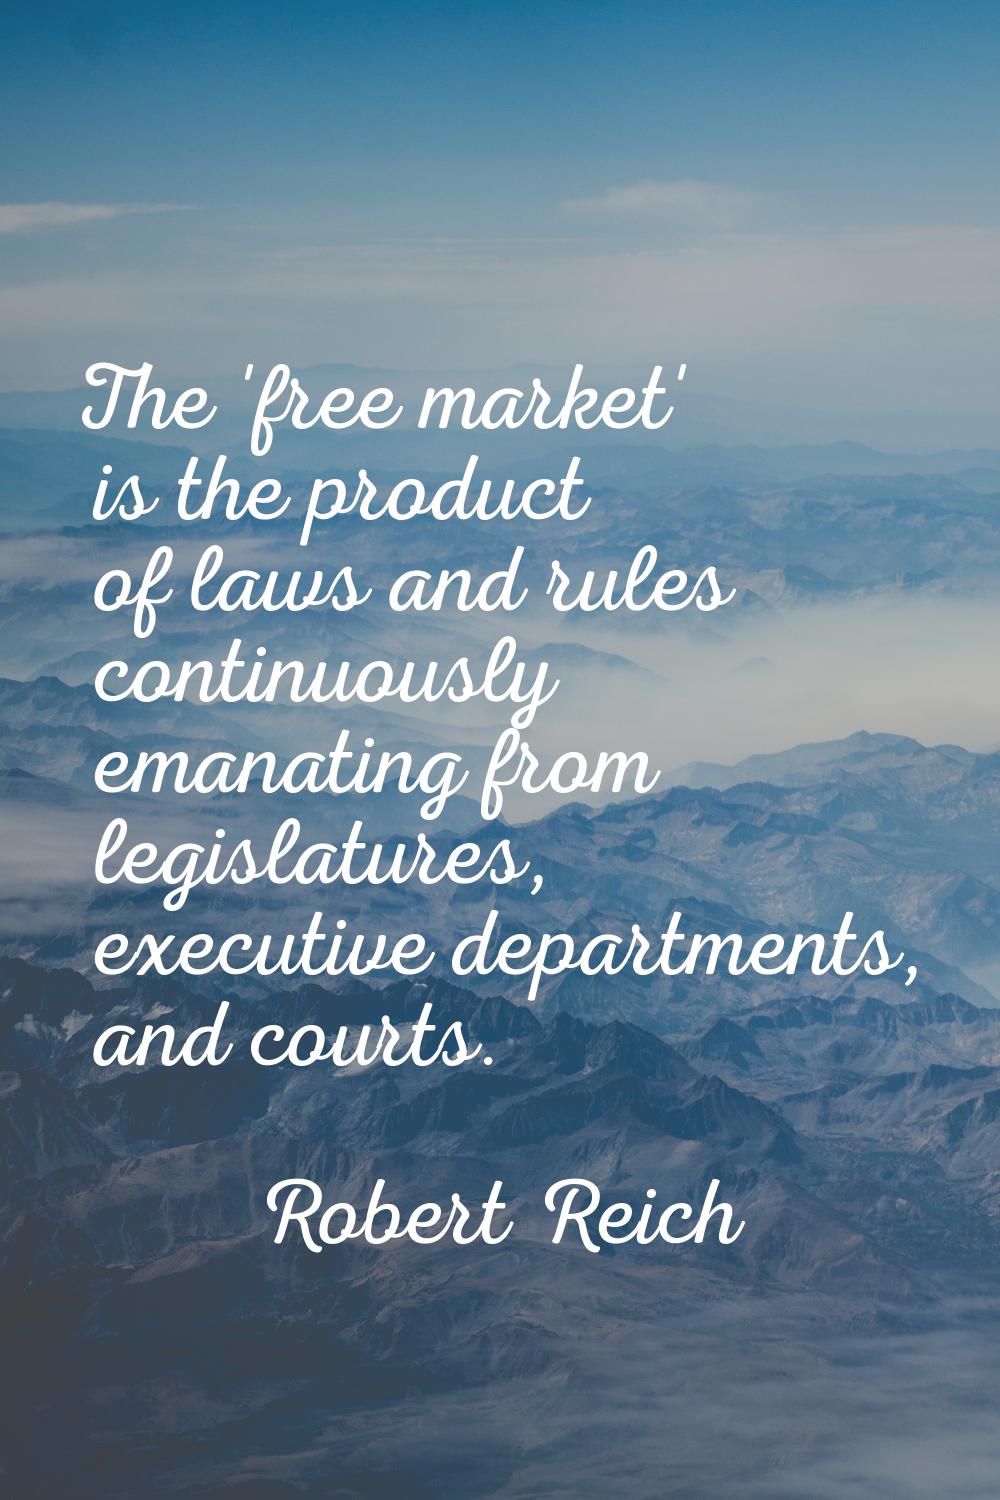 The 'free market' is the product of laws and rules continuously emanating from legislatures, execut